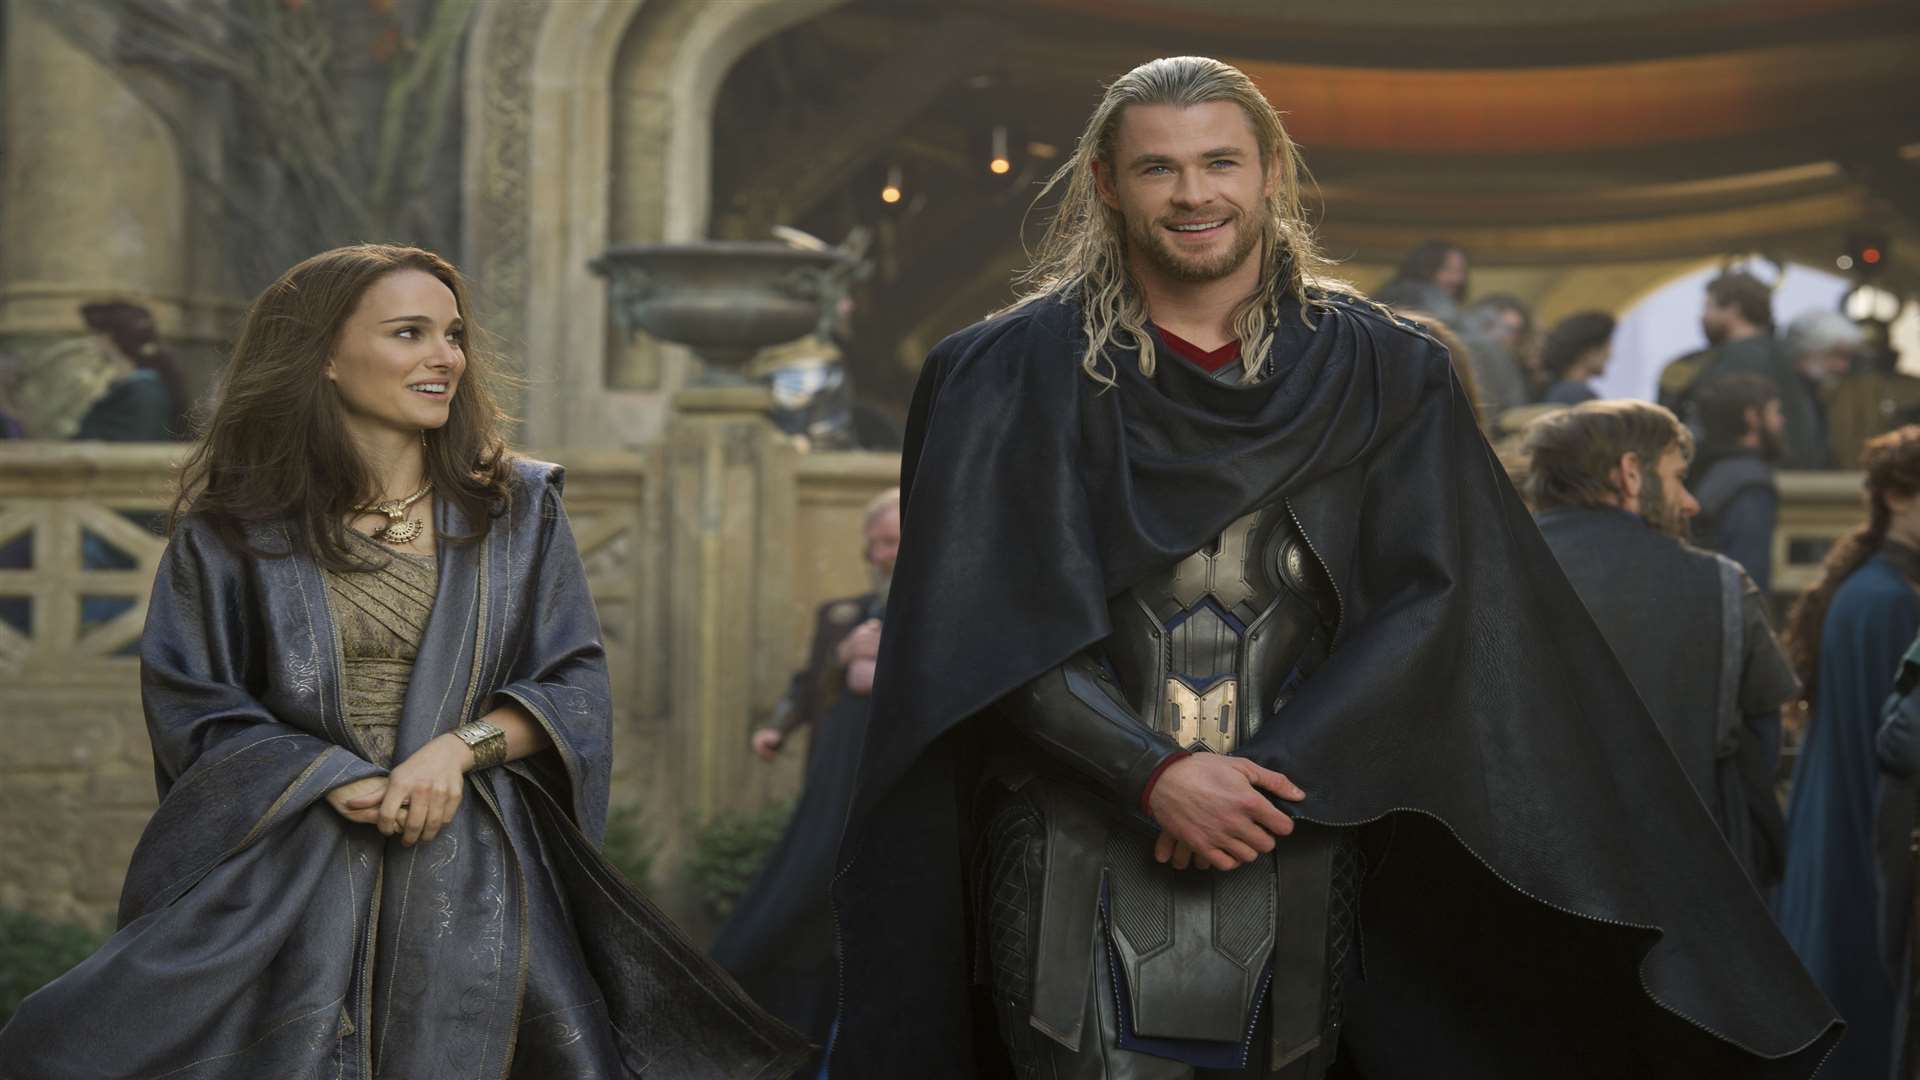 Chris Hemsworth as Thor and Natalie Portman as Jane Foster, in Thor: The Dark World. Picture: PA Photo/Marvel